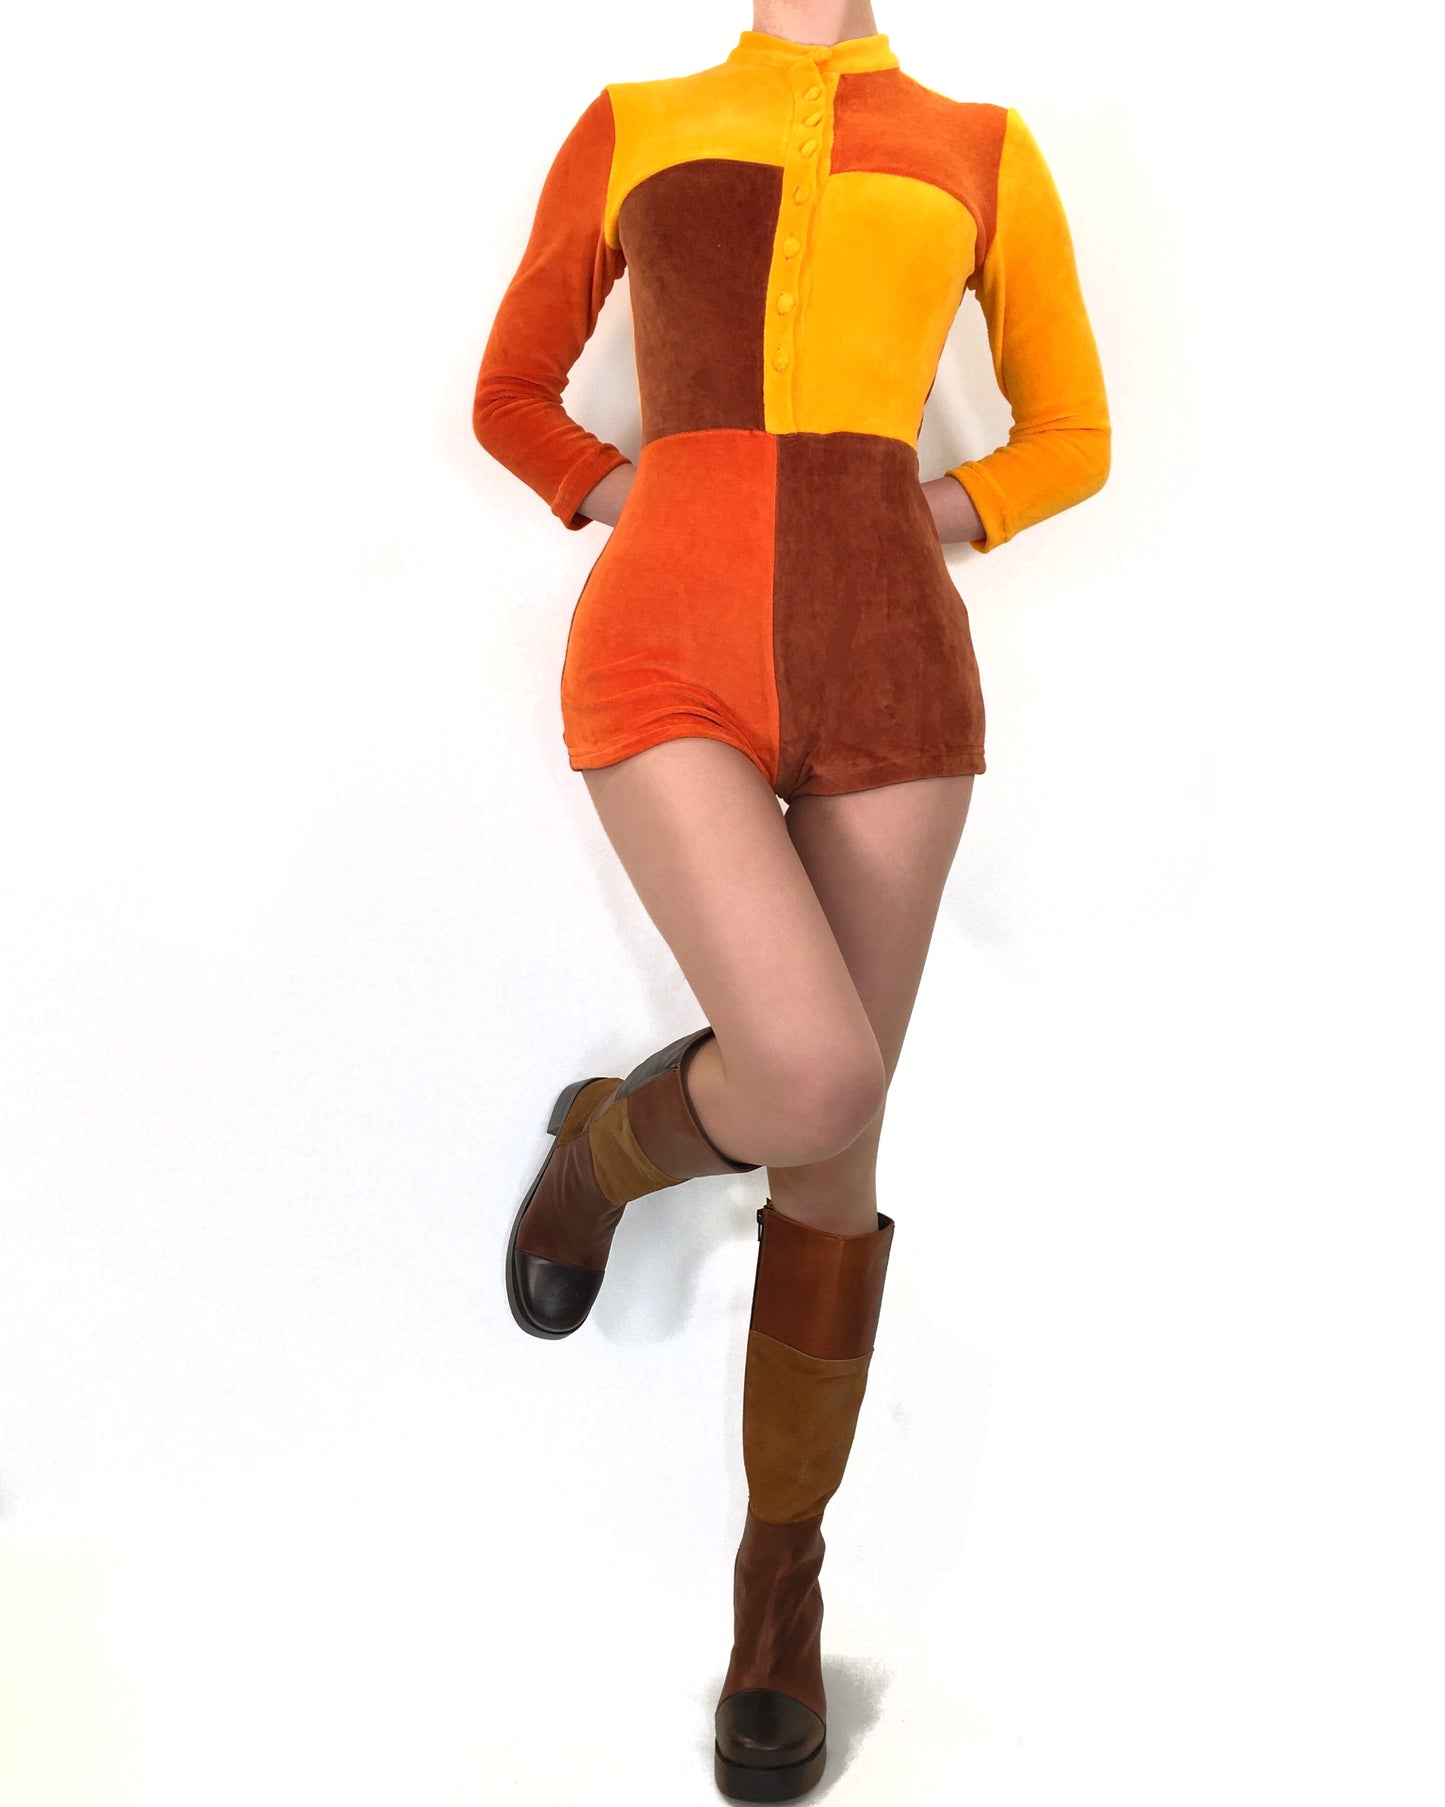 The Velvet Colour Block Playsuit in Lady Marmalade